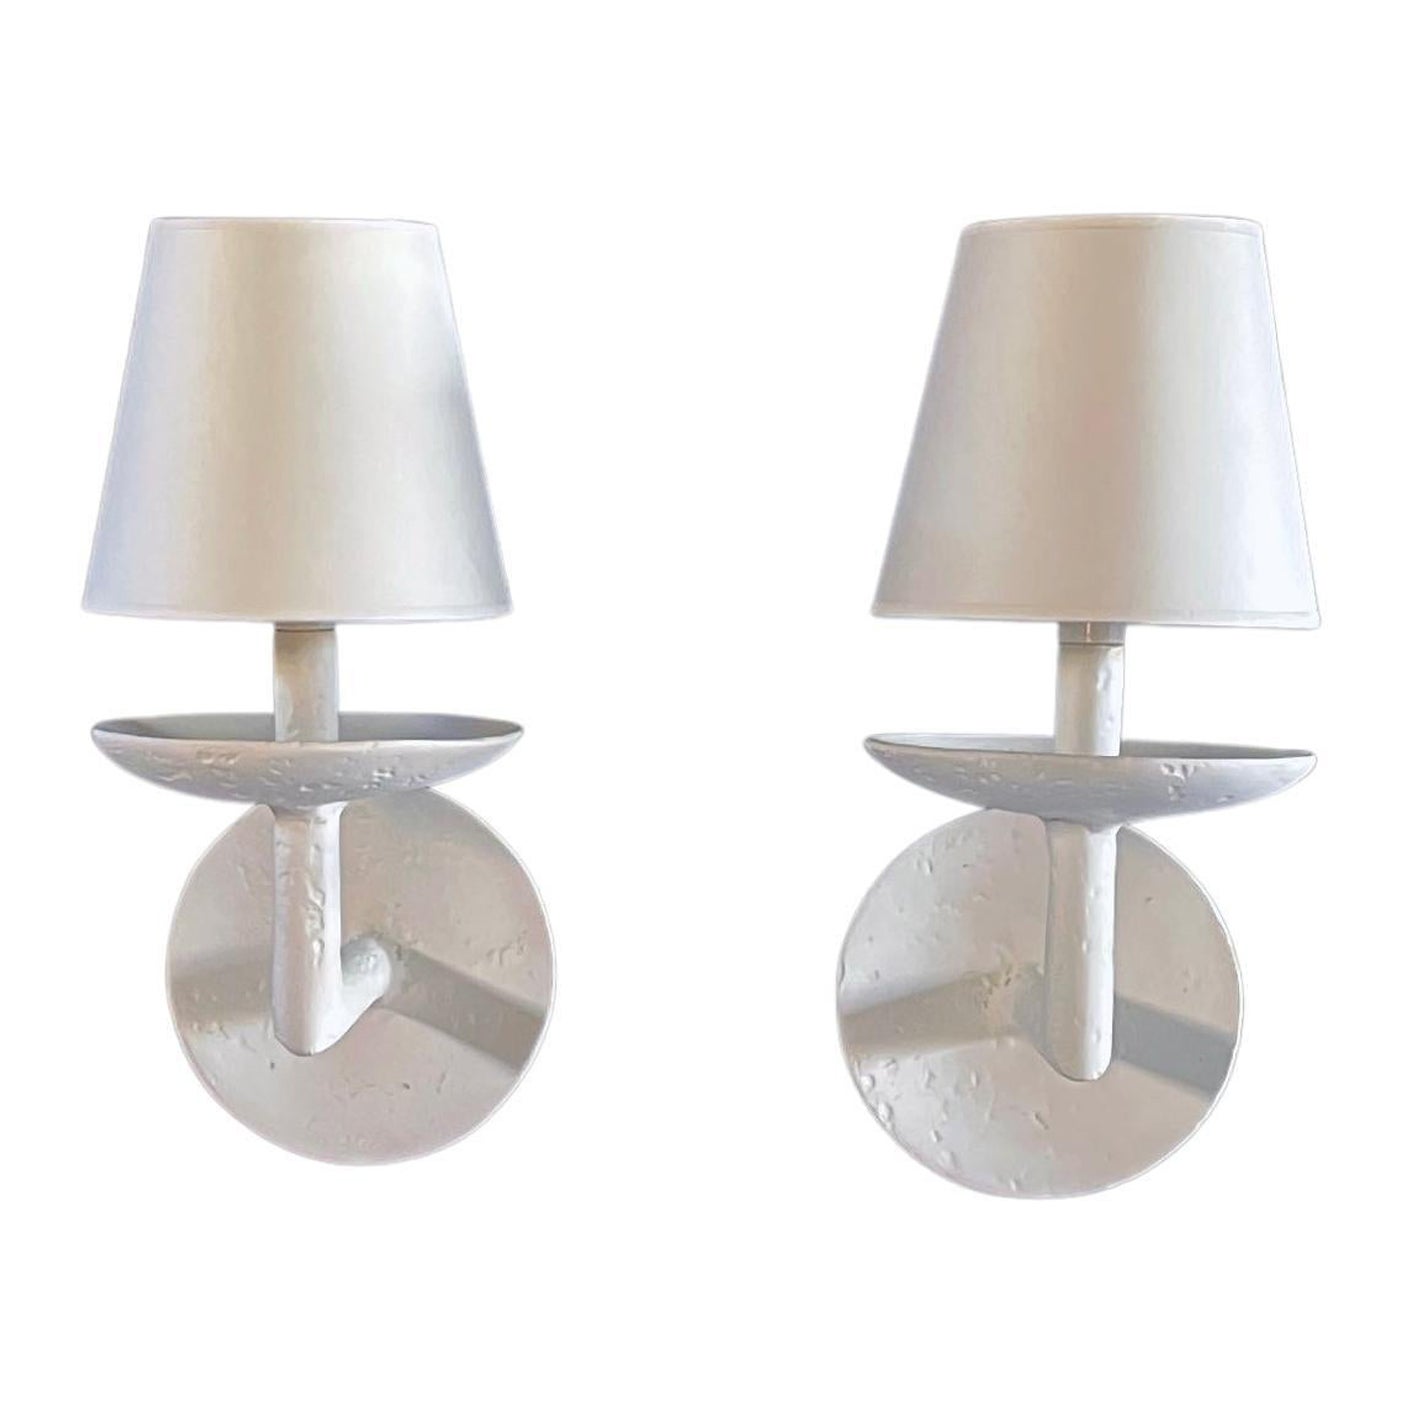 Pair of Couronnes Model 3 Sconces by Bourgeois Boheme Atelier For Sale